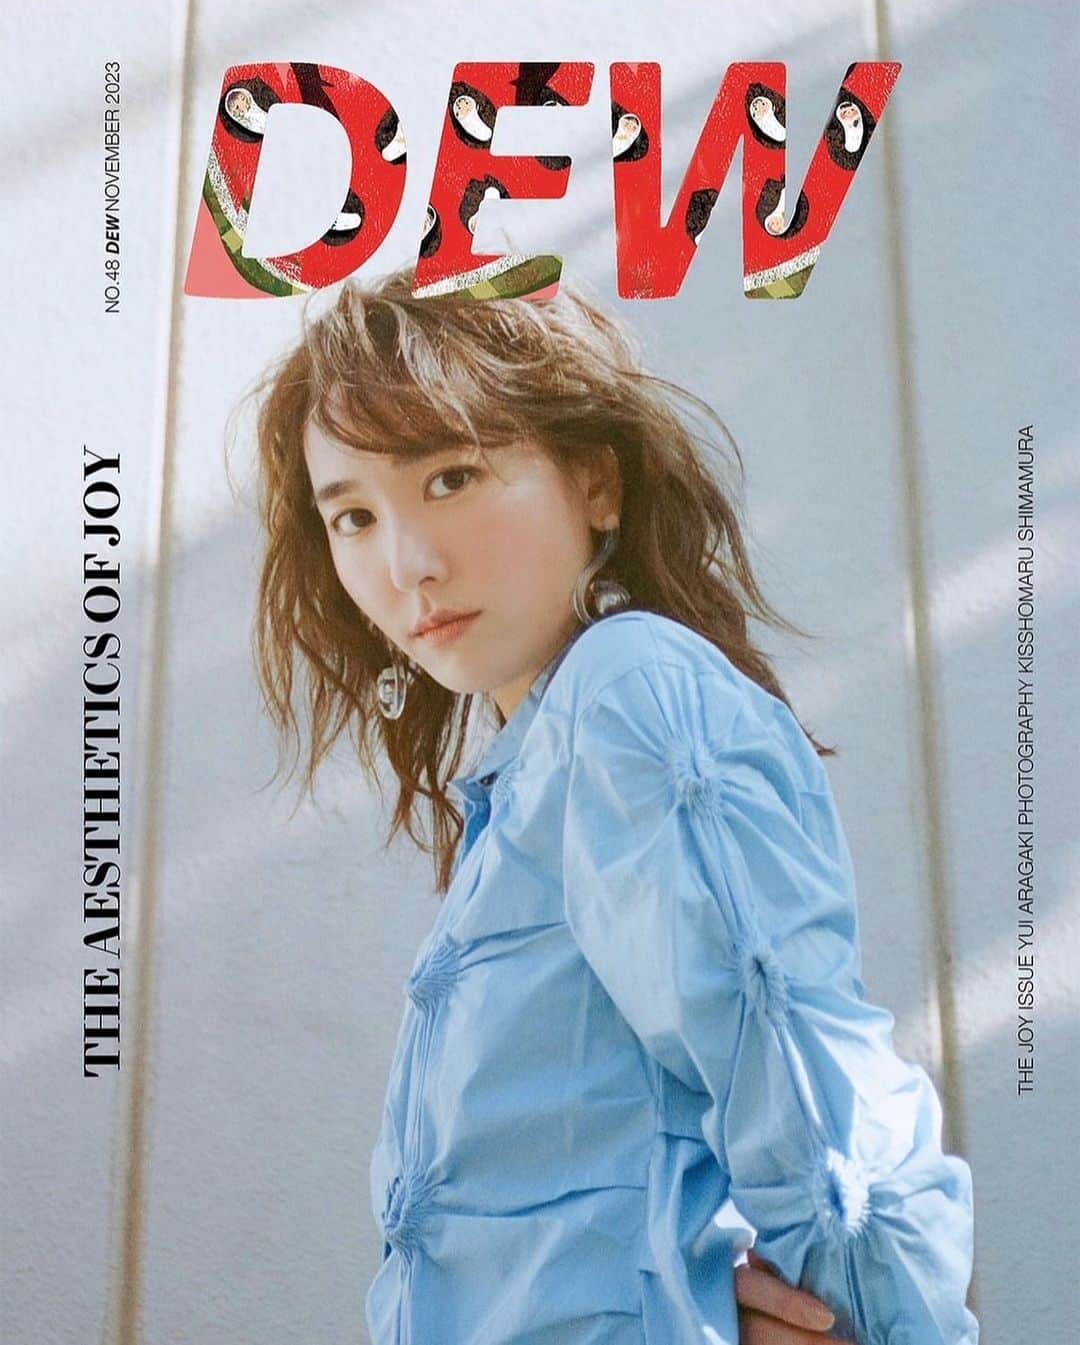 Kisshomaru S.のインスタグラム：「Yui Aragaki for DEW Magazine @dewmagazine #48 Joy Issue Fall 2033 Cover Story with @rumche_official   Styling @kaori_912 Hair @miho_emo_ Make-up @annamisawa Casting director @kayaxxi Logo @tasneem_marghani」